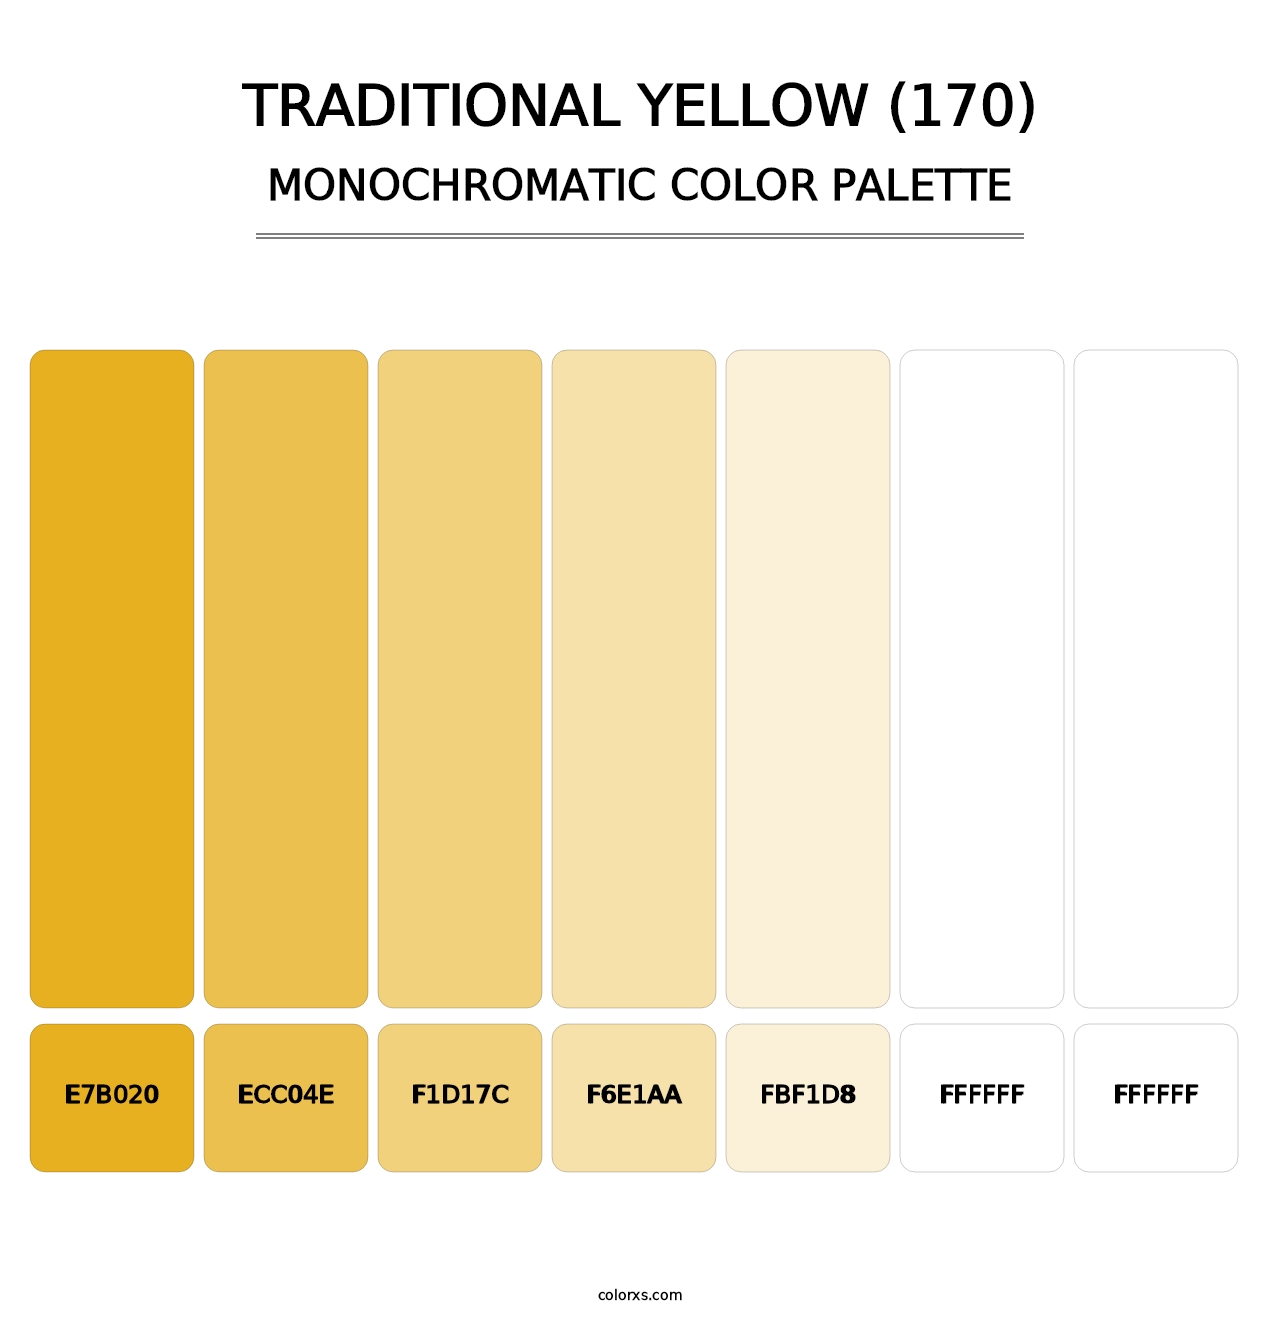 Traditional Yellow (170) - Monochromatic Color Palette